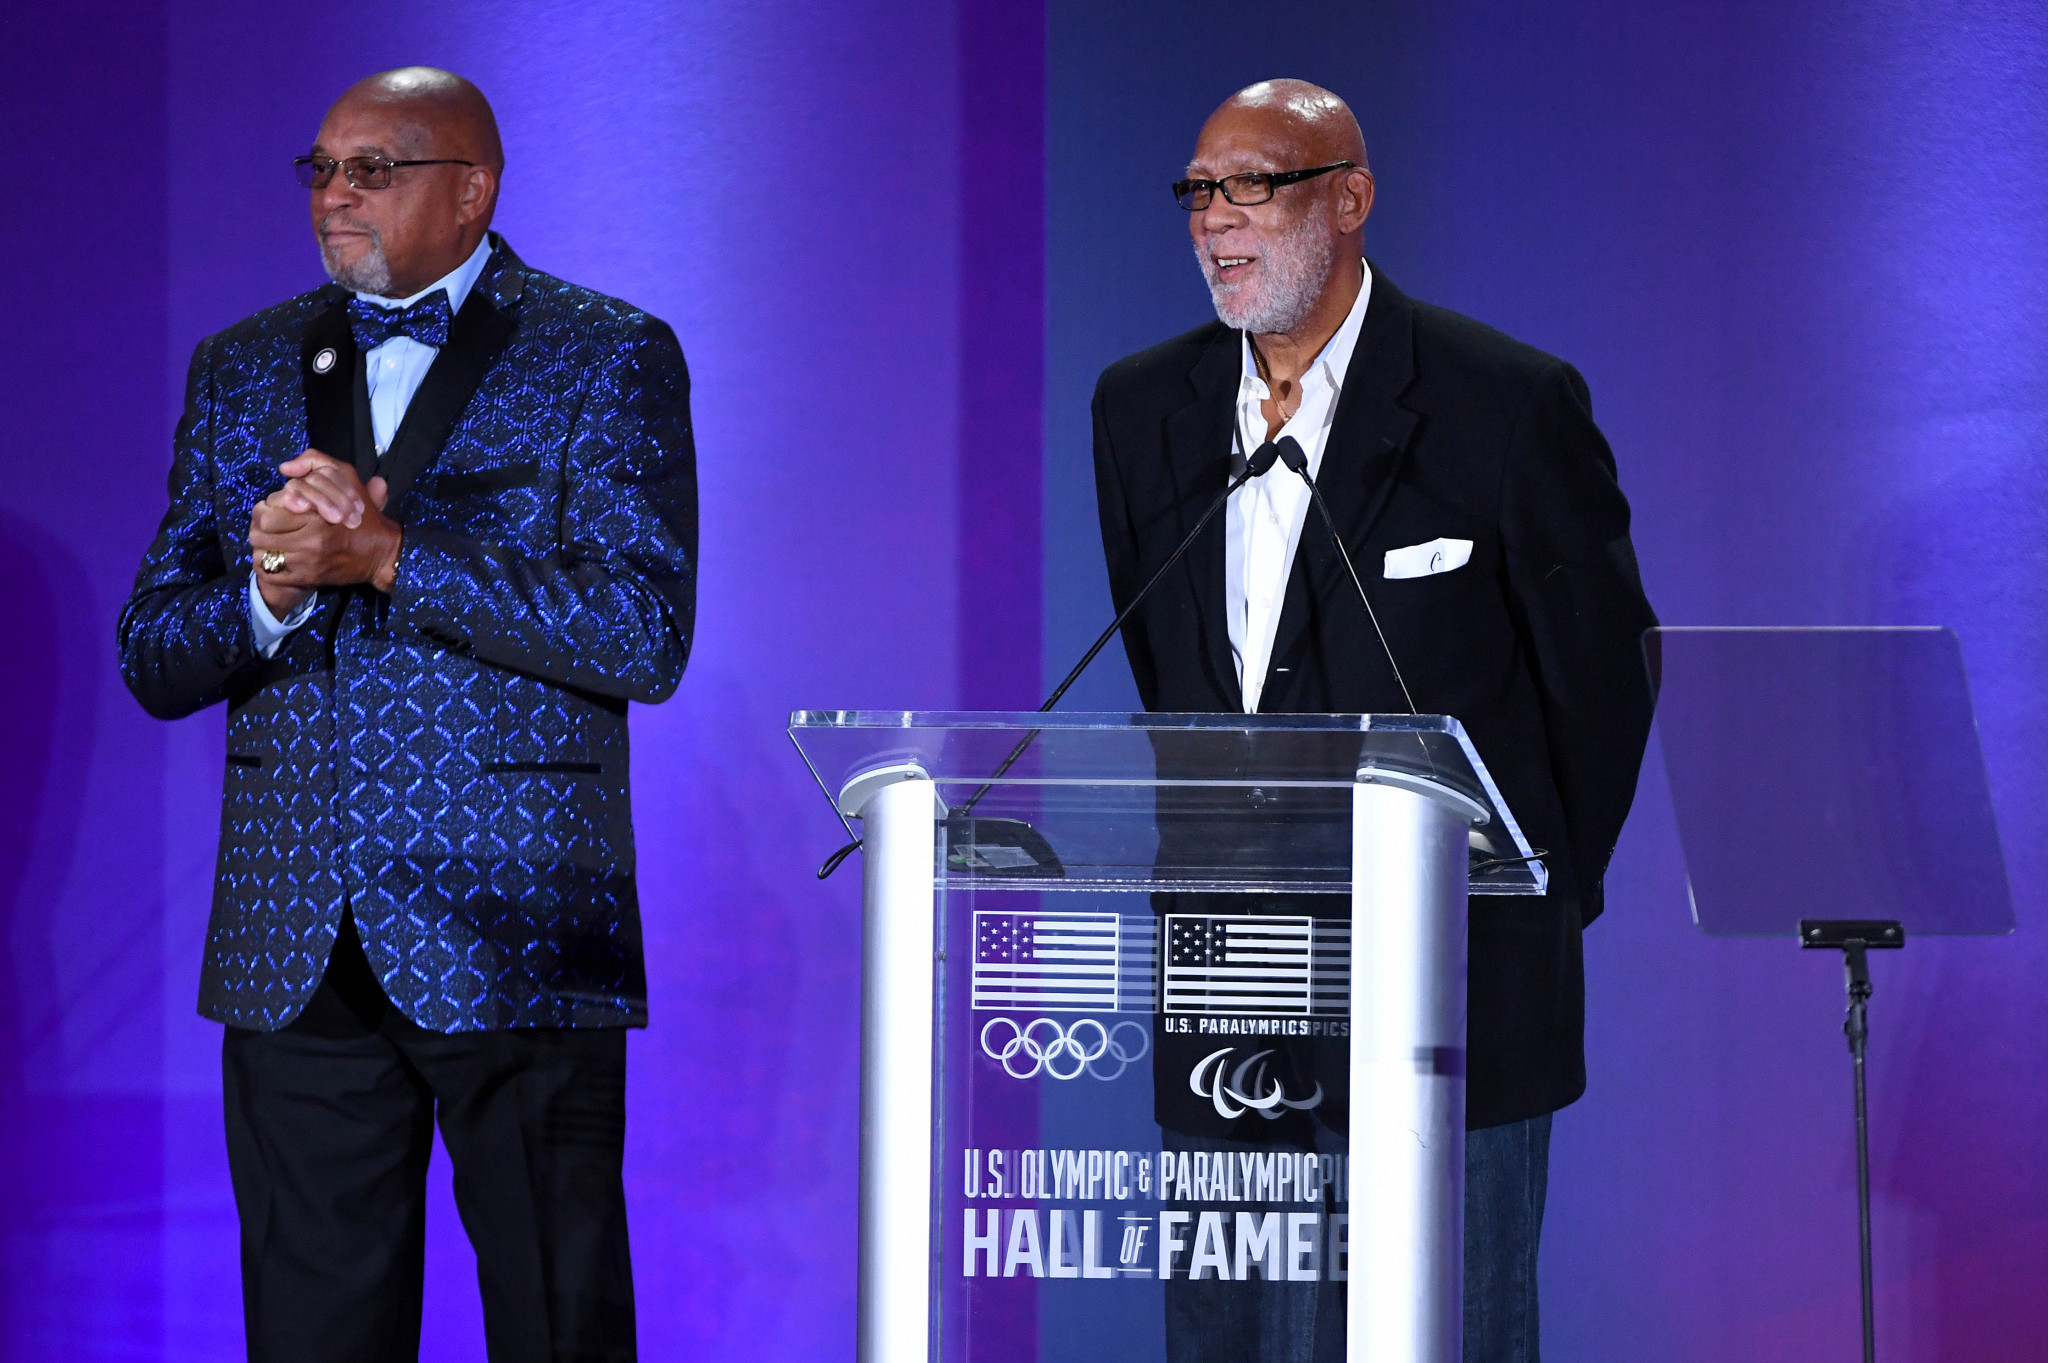 Black power sprinters inducted into USOPC Hall of Fame as Carlos insists no regrets over iconic protest